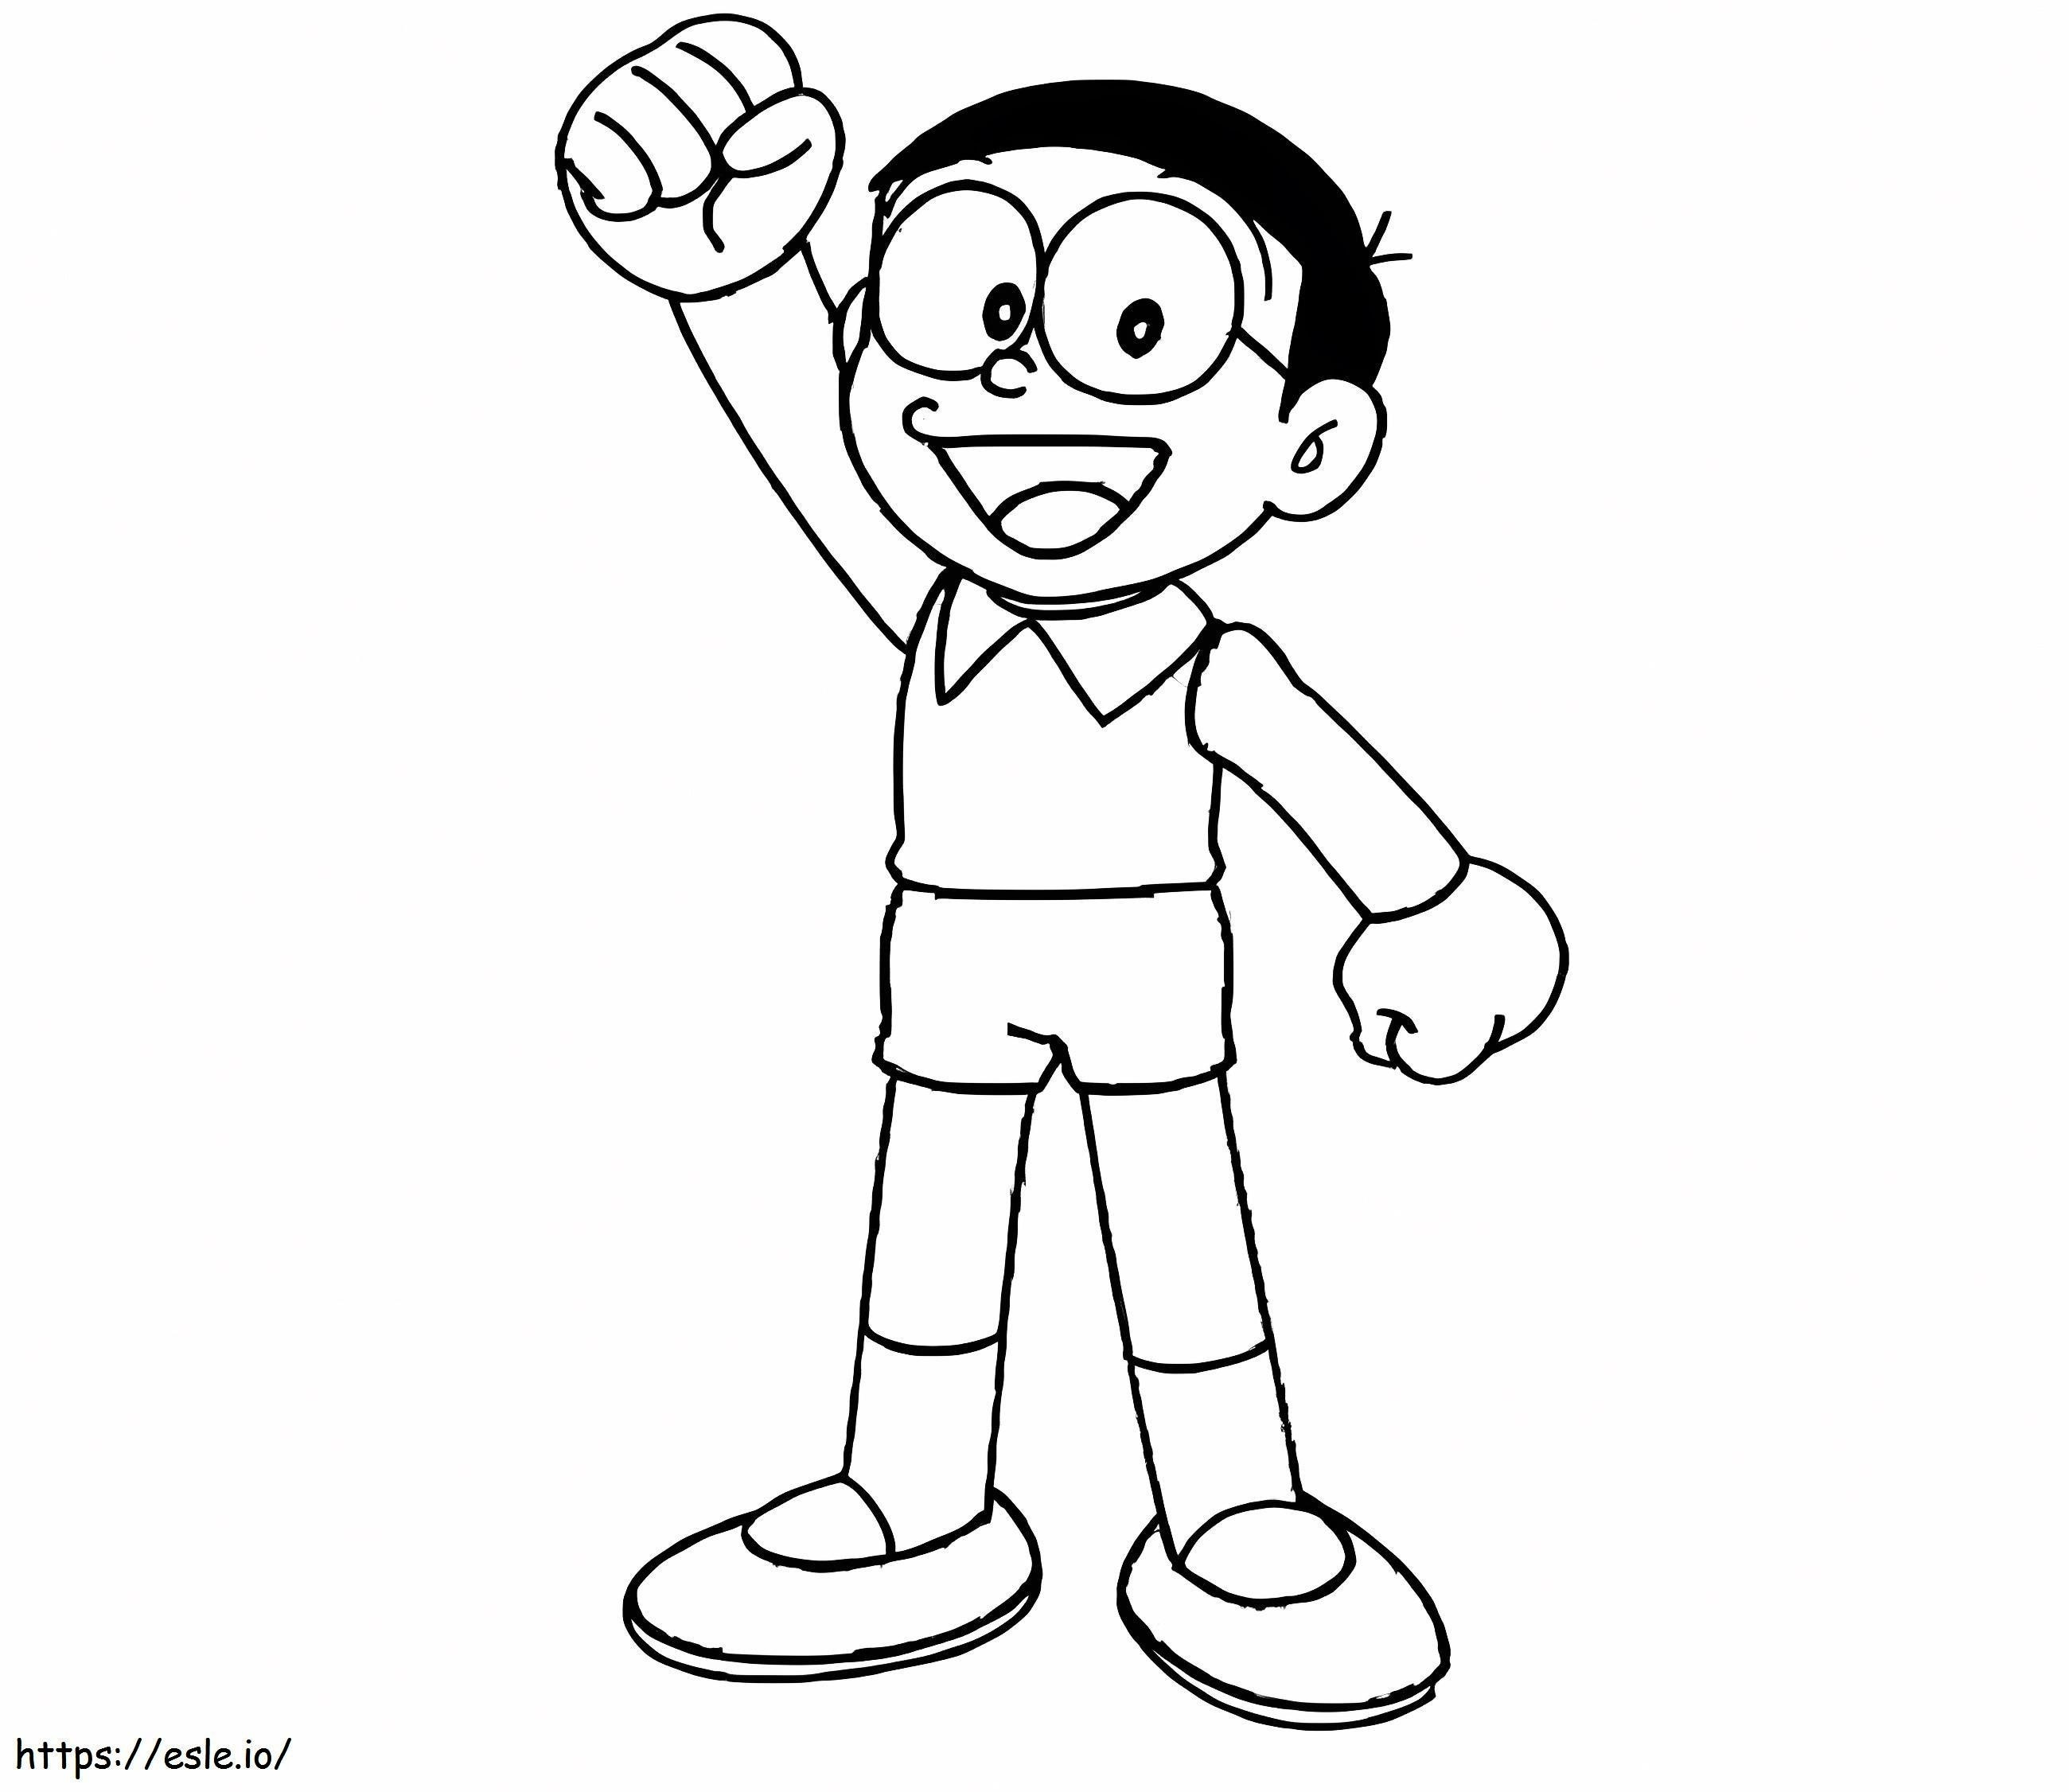 He Knows Him And Trusts Him coloring page